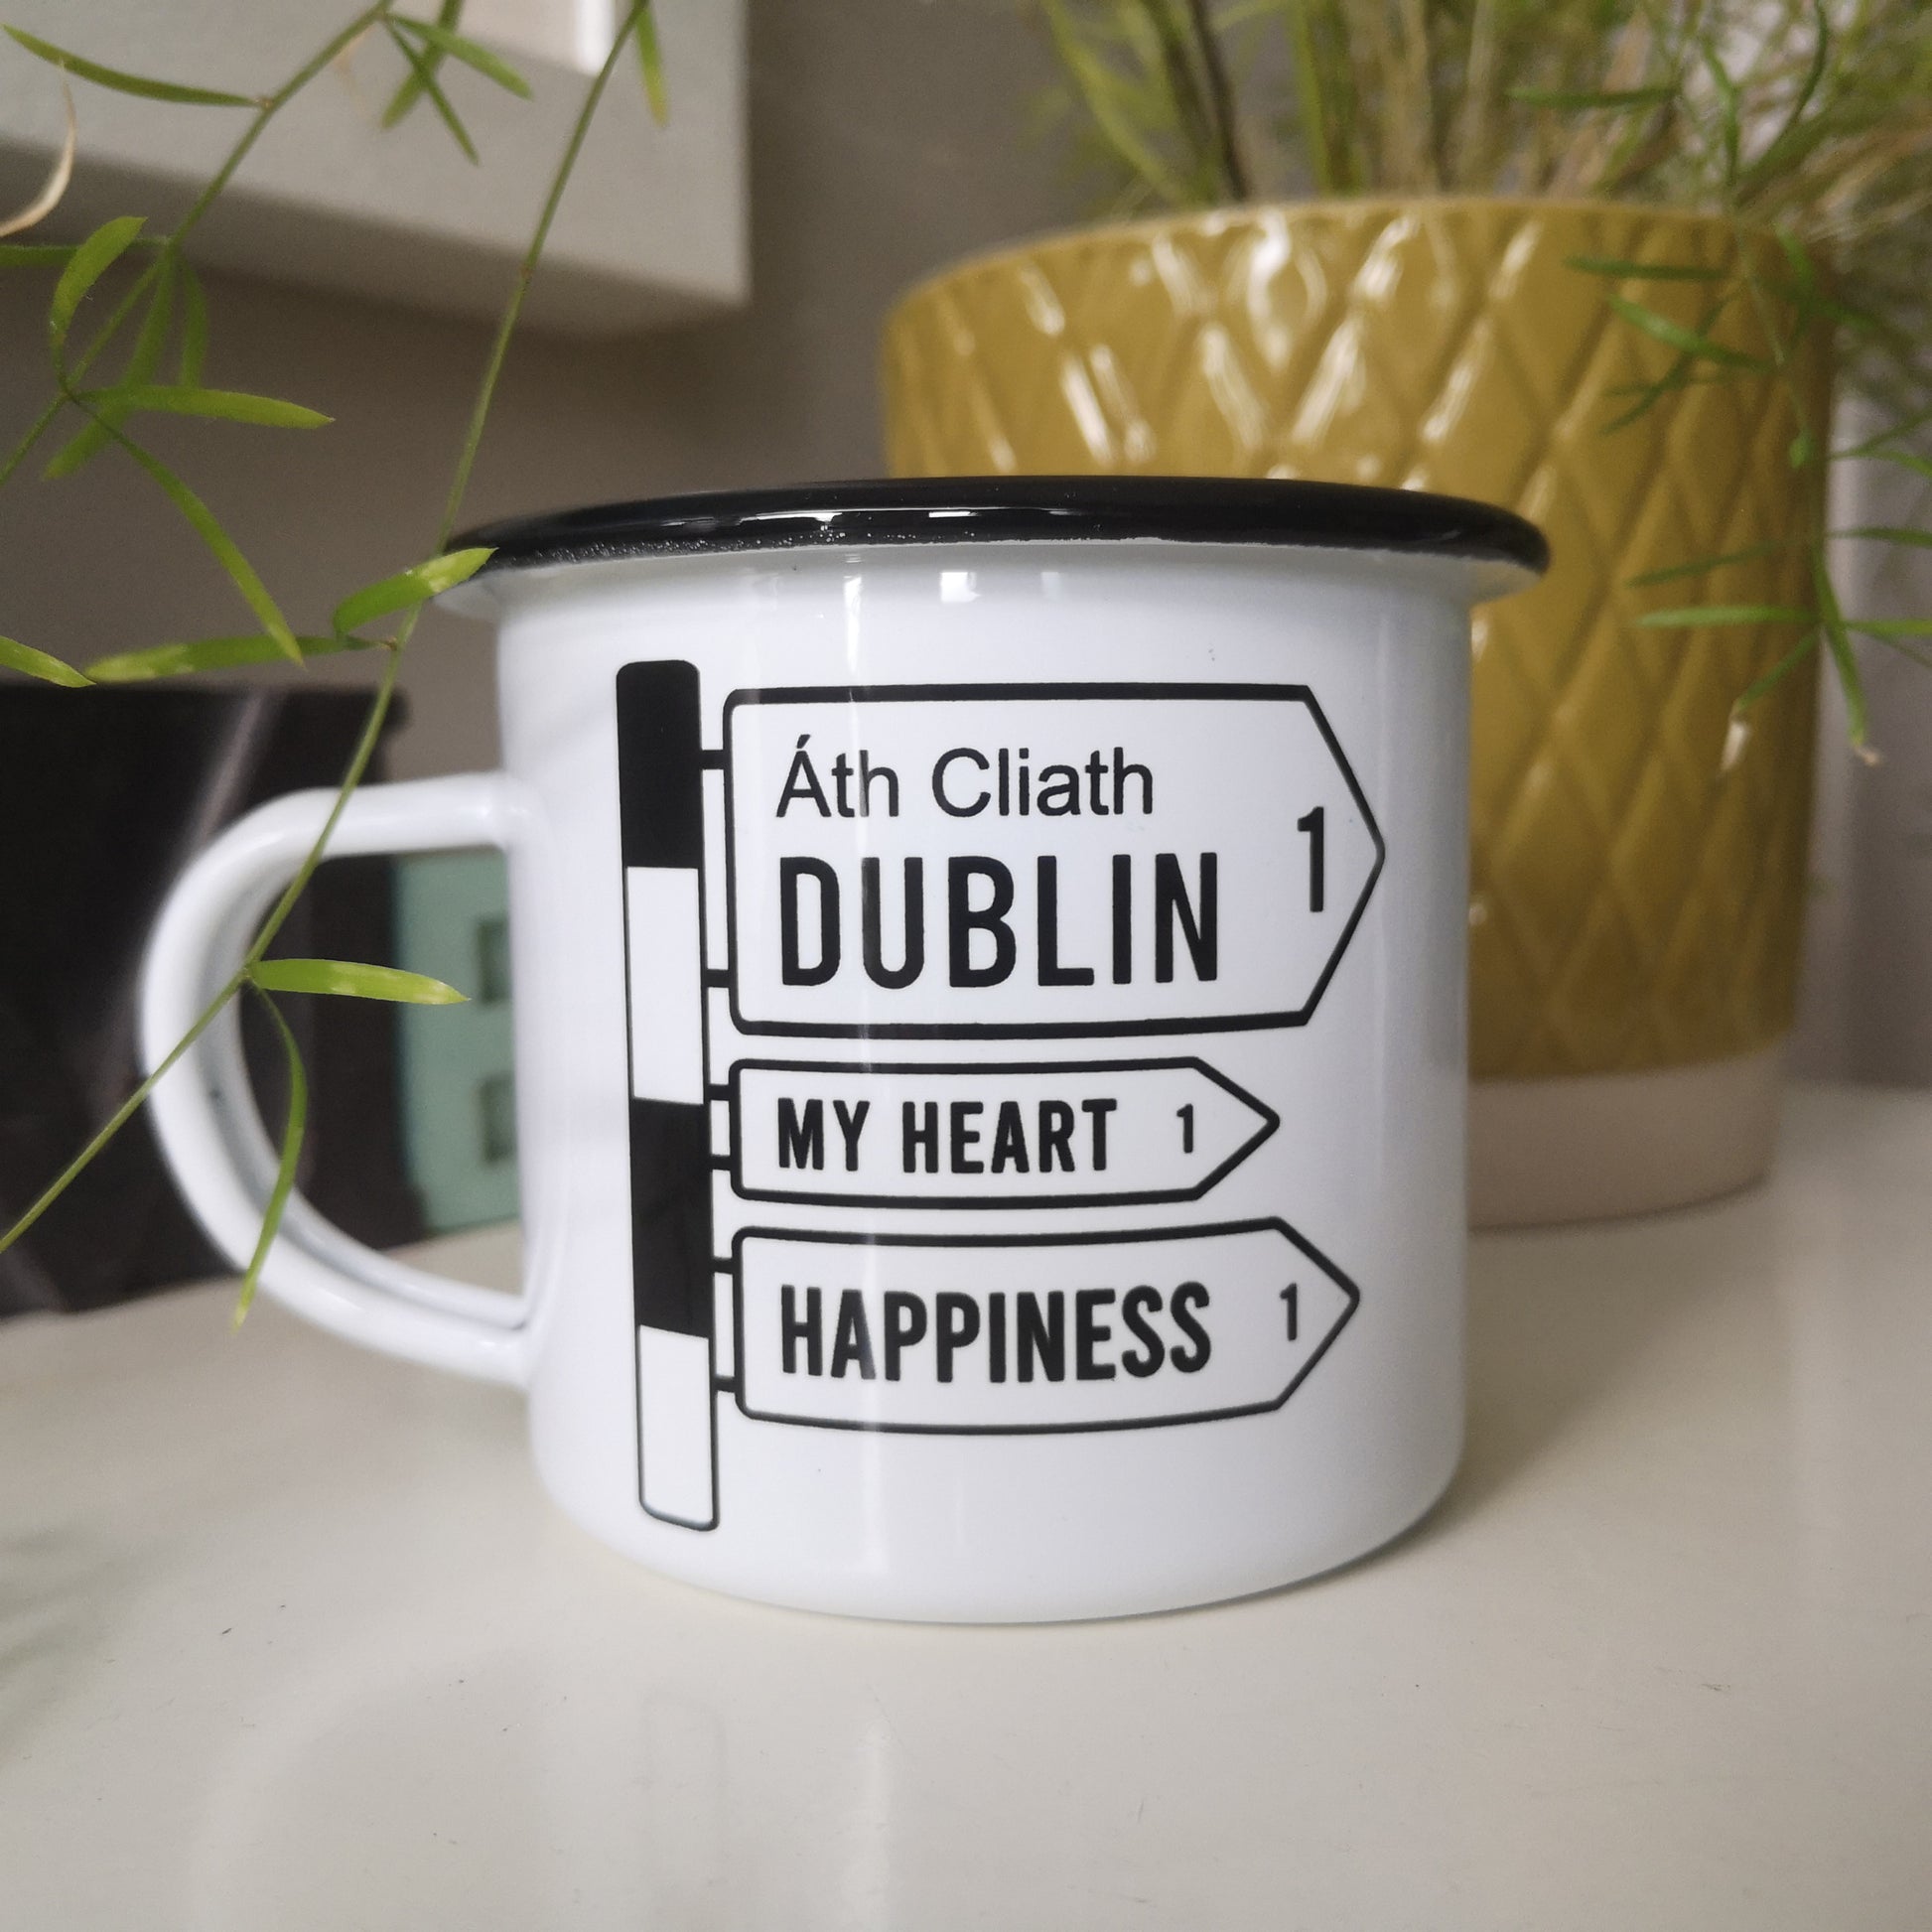 A Customised white steel enamel mug with your selected placename on it in an old fashioned black and white irish roadsign. This one points to Dublin! Along with My heart and Happiness.